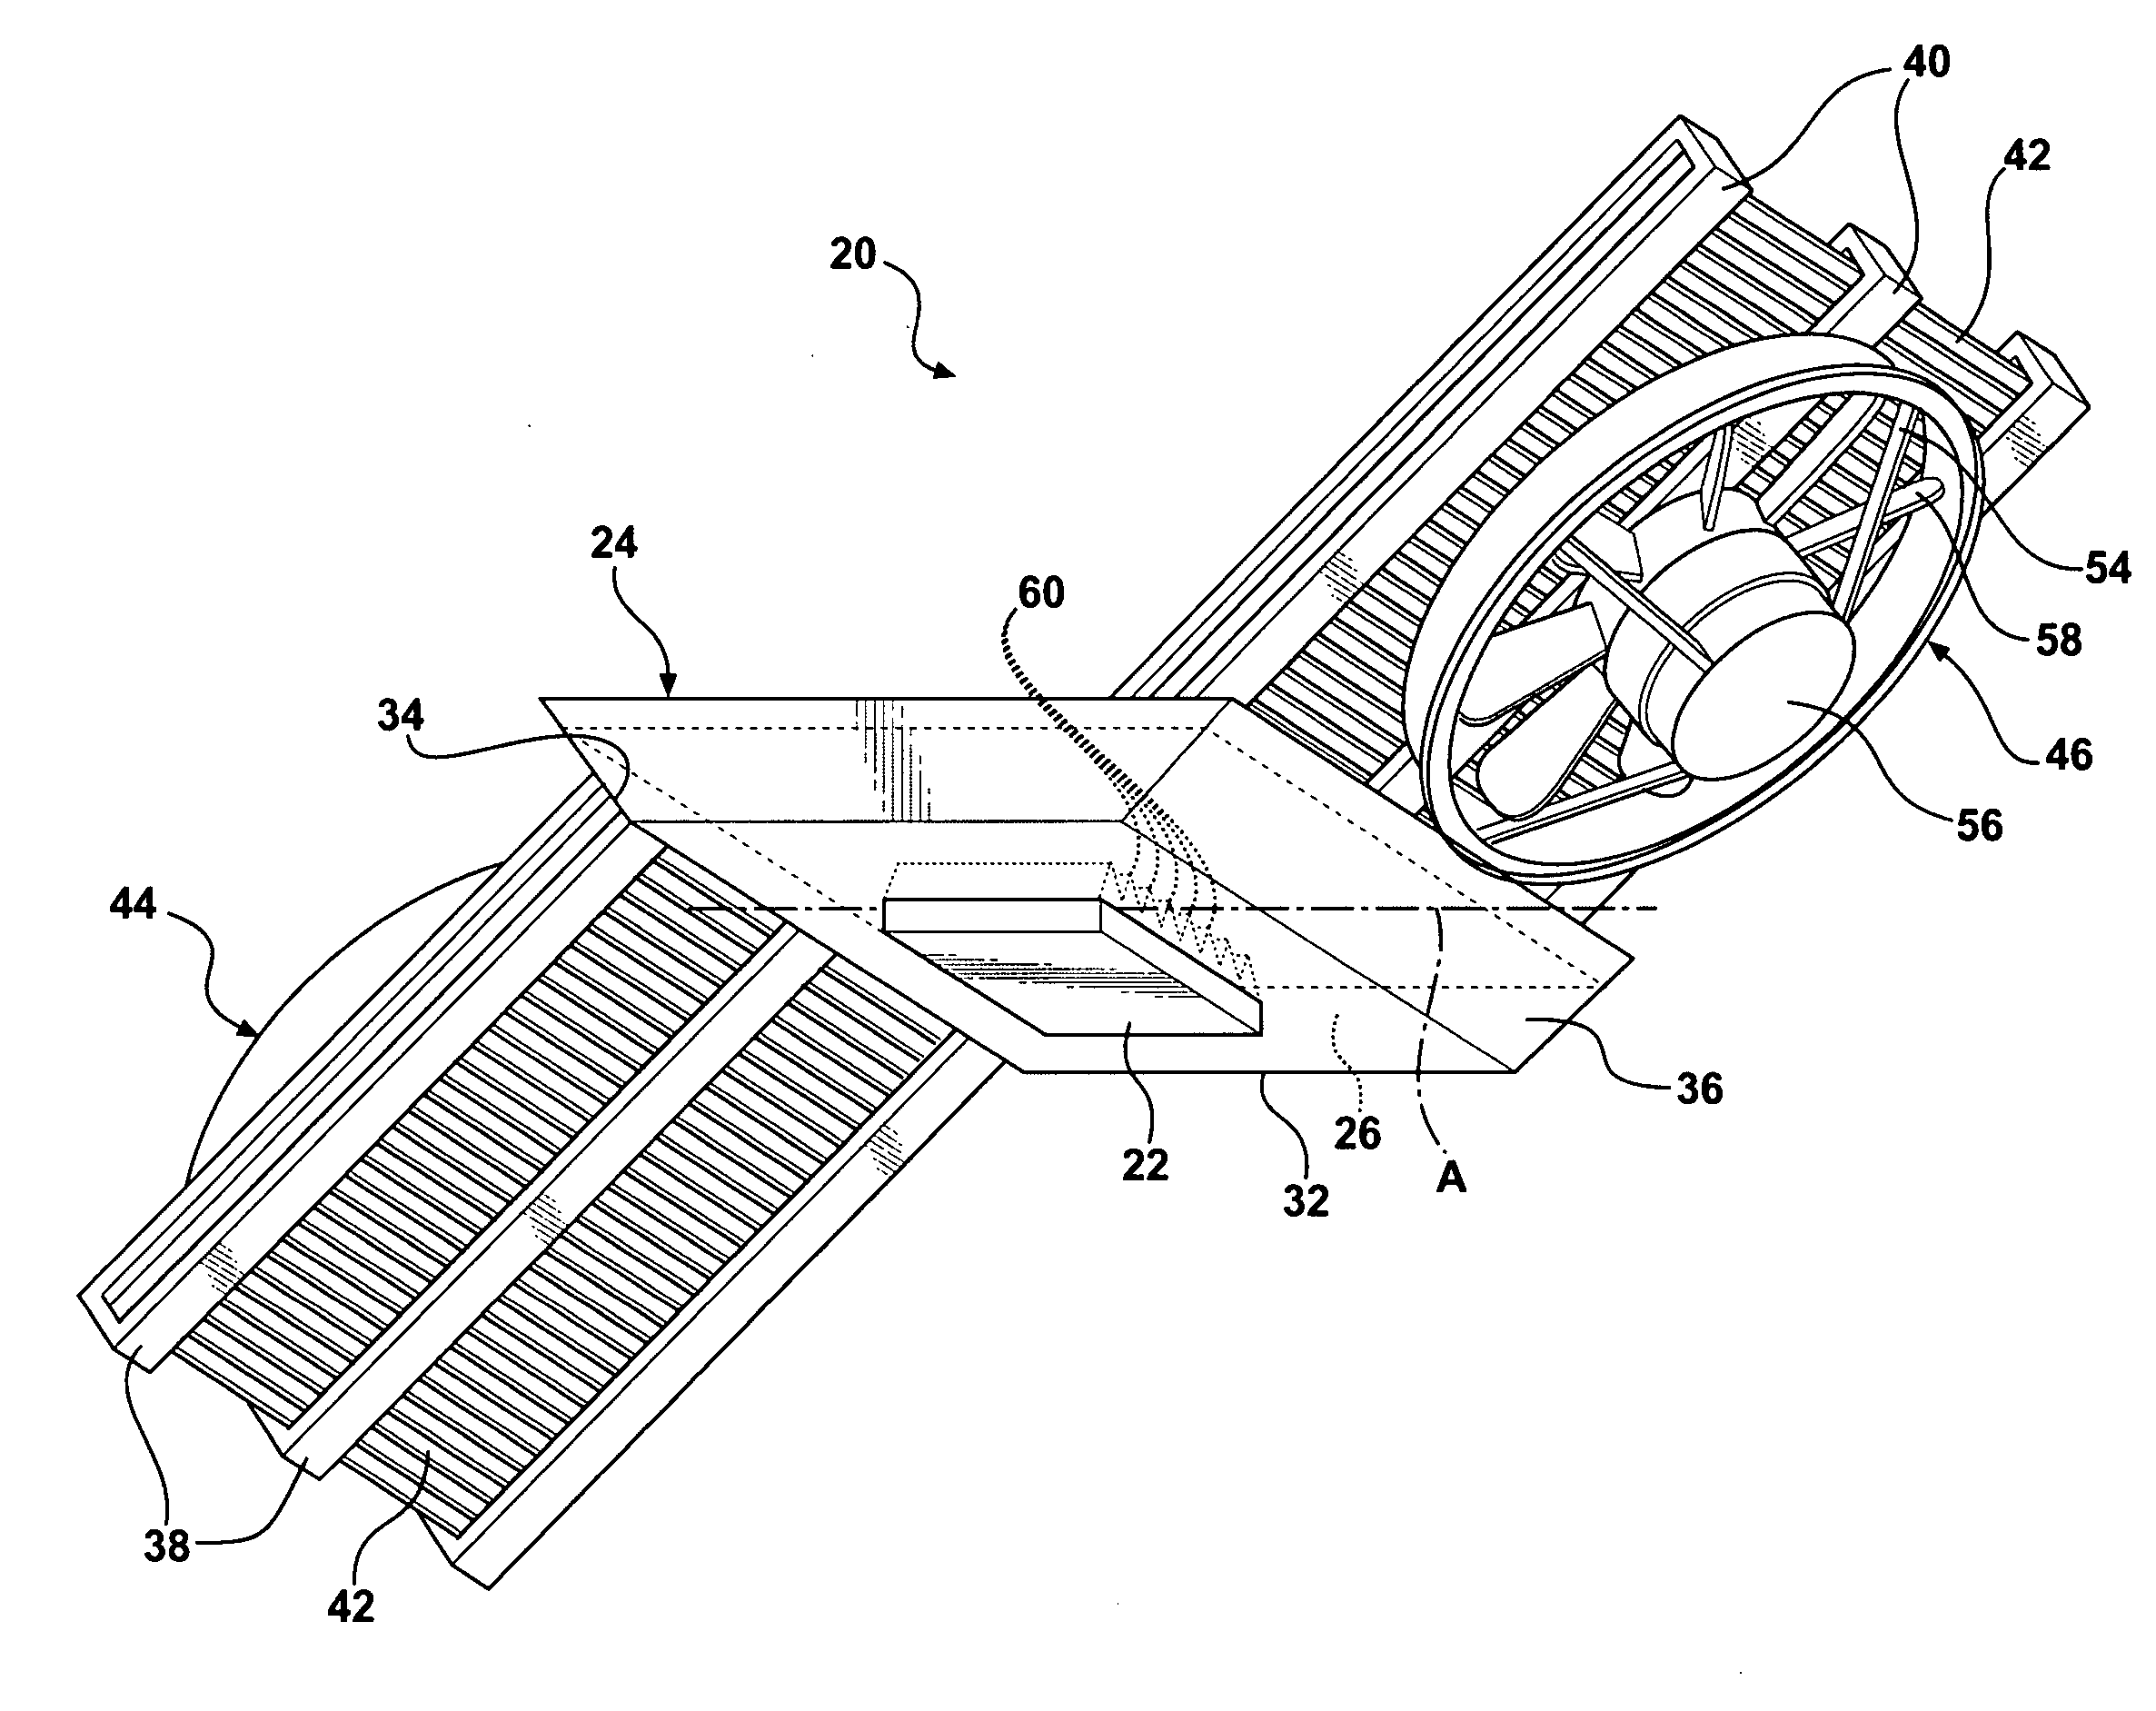 Orientation insensitive thermosiphon capable of operation in upside down position